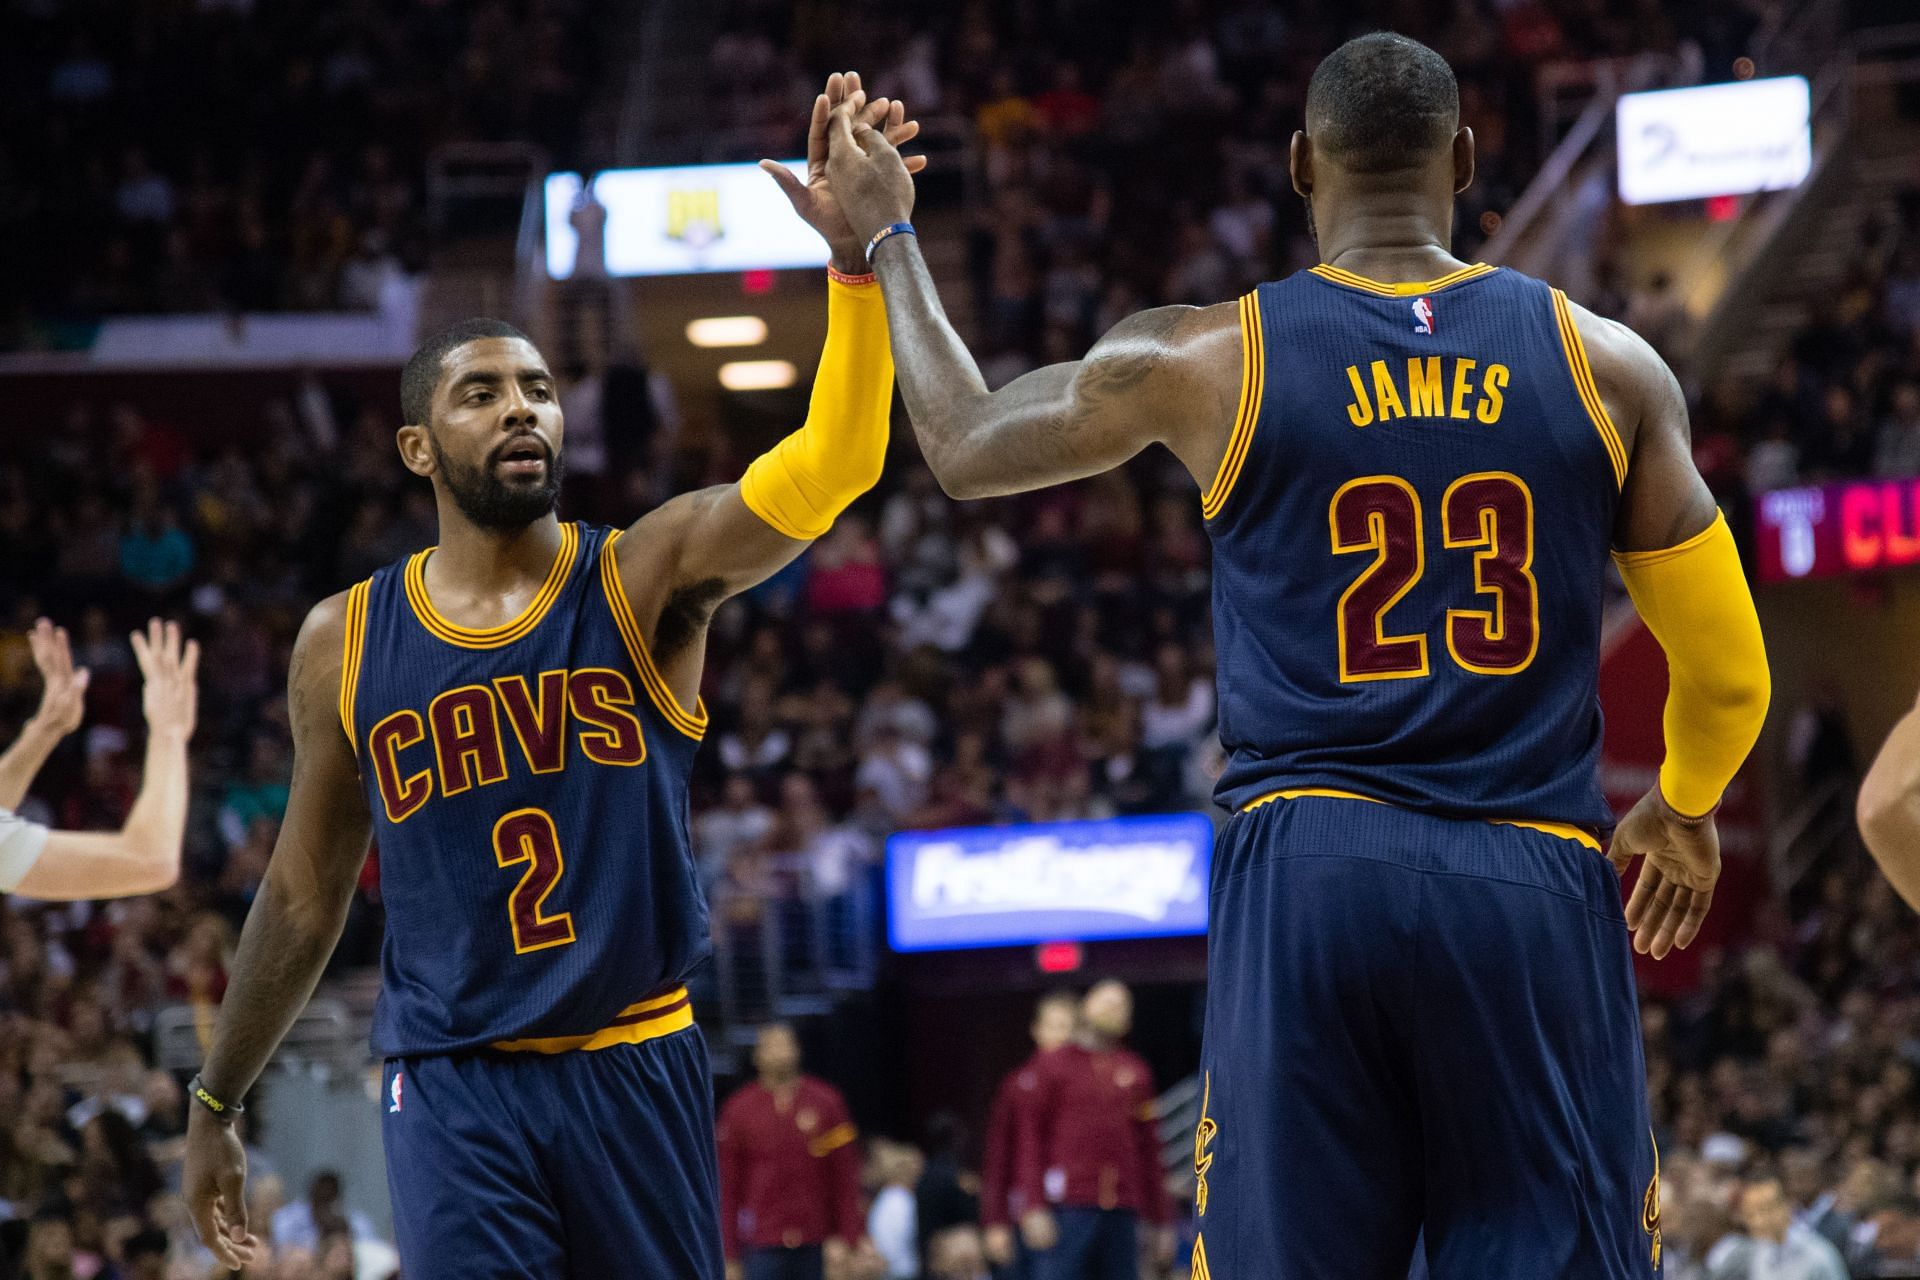 Kyrie Irving and LeBron James of the Cleveland Cavaliers.